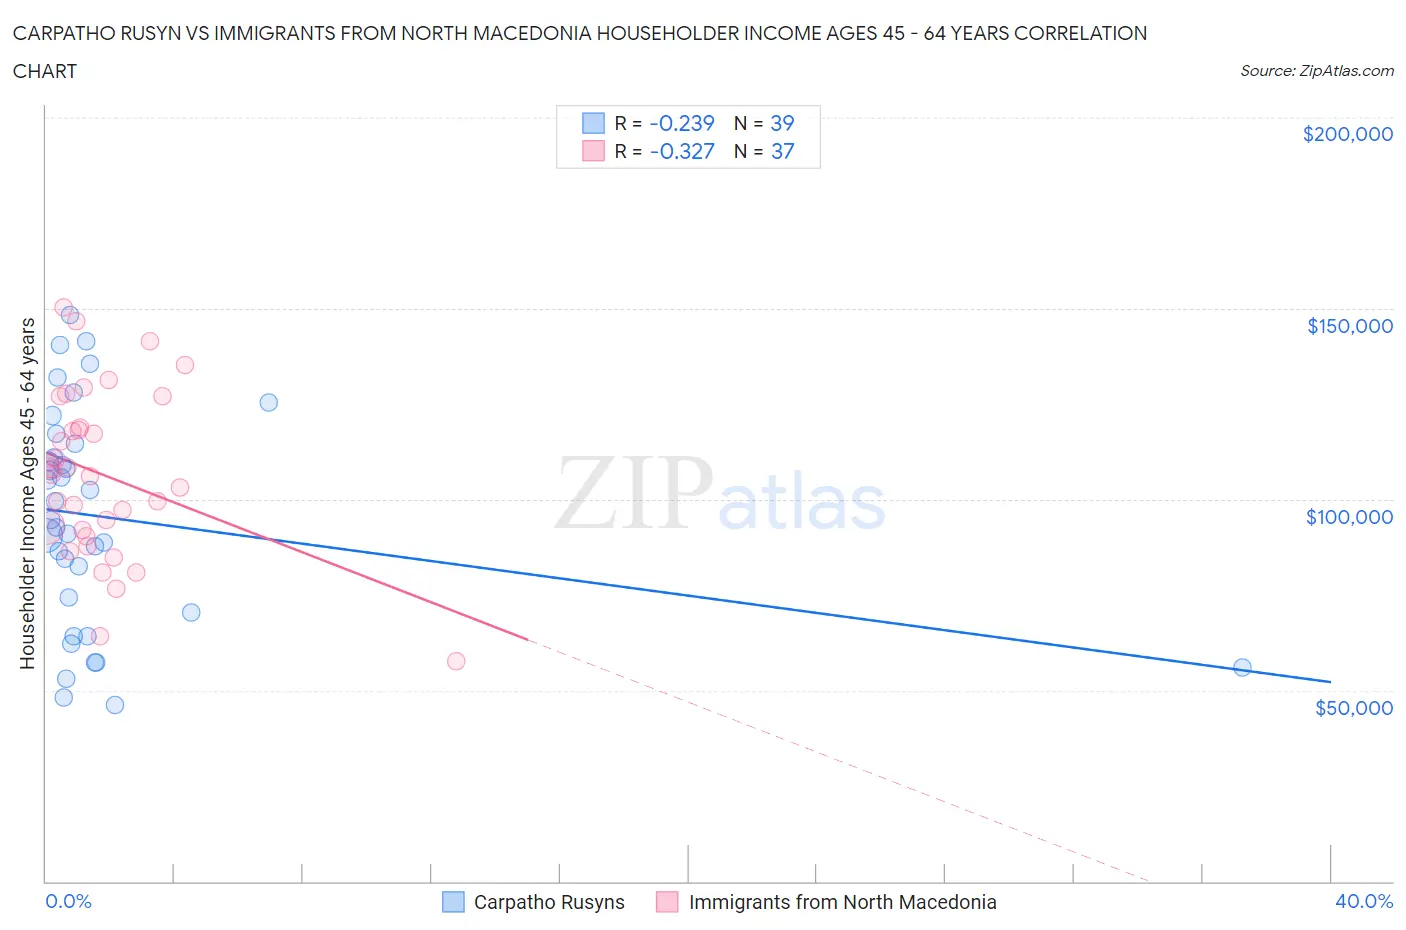 Carpatho Rusyn vs Immigrants from North Macedonia Householder Income Ages 45 - 64 years